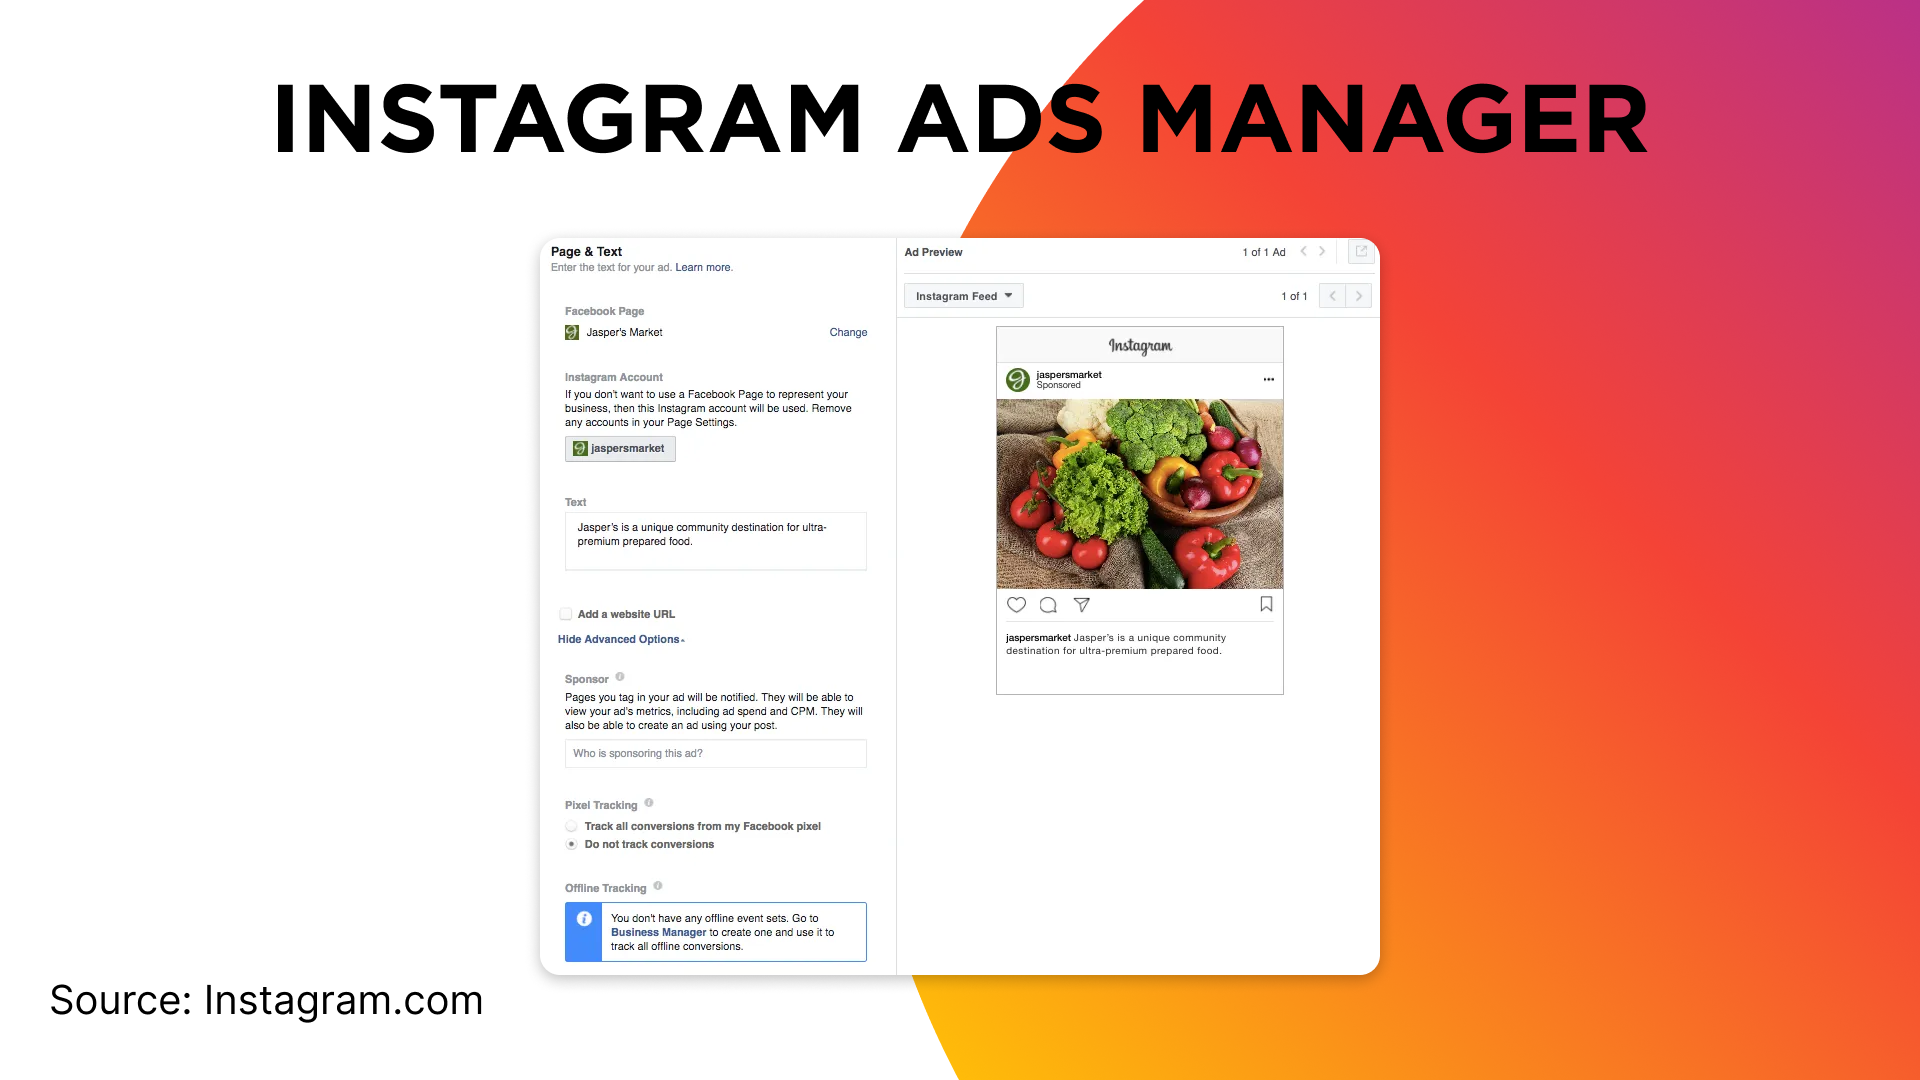 Instagram Ads Manager interface